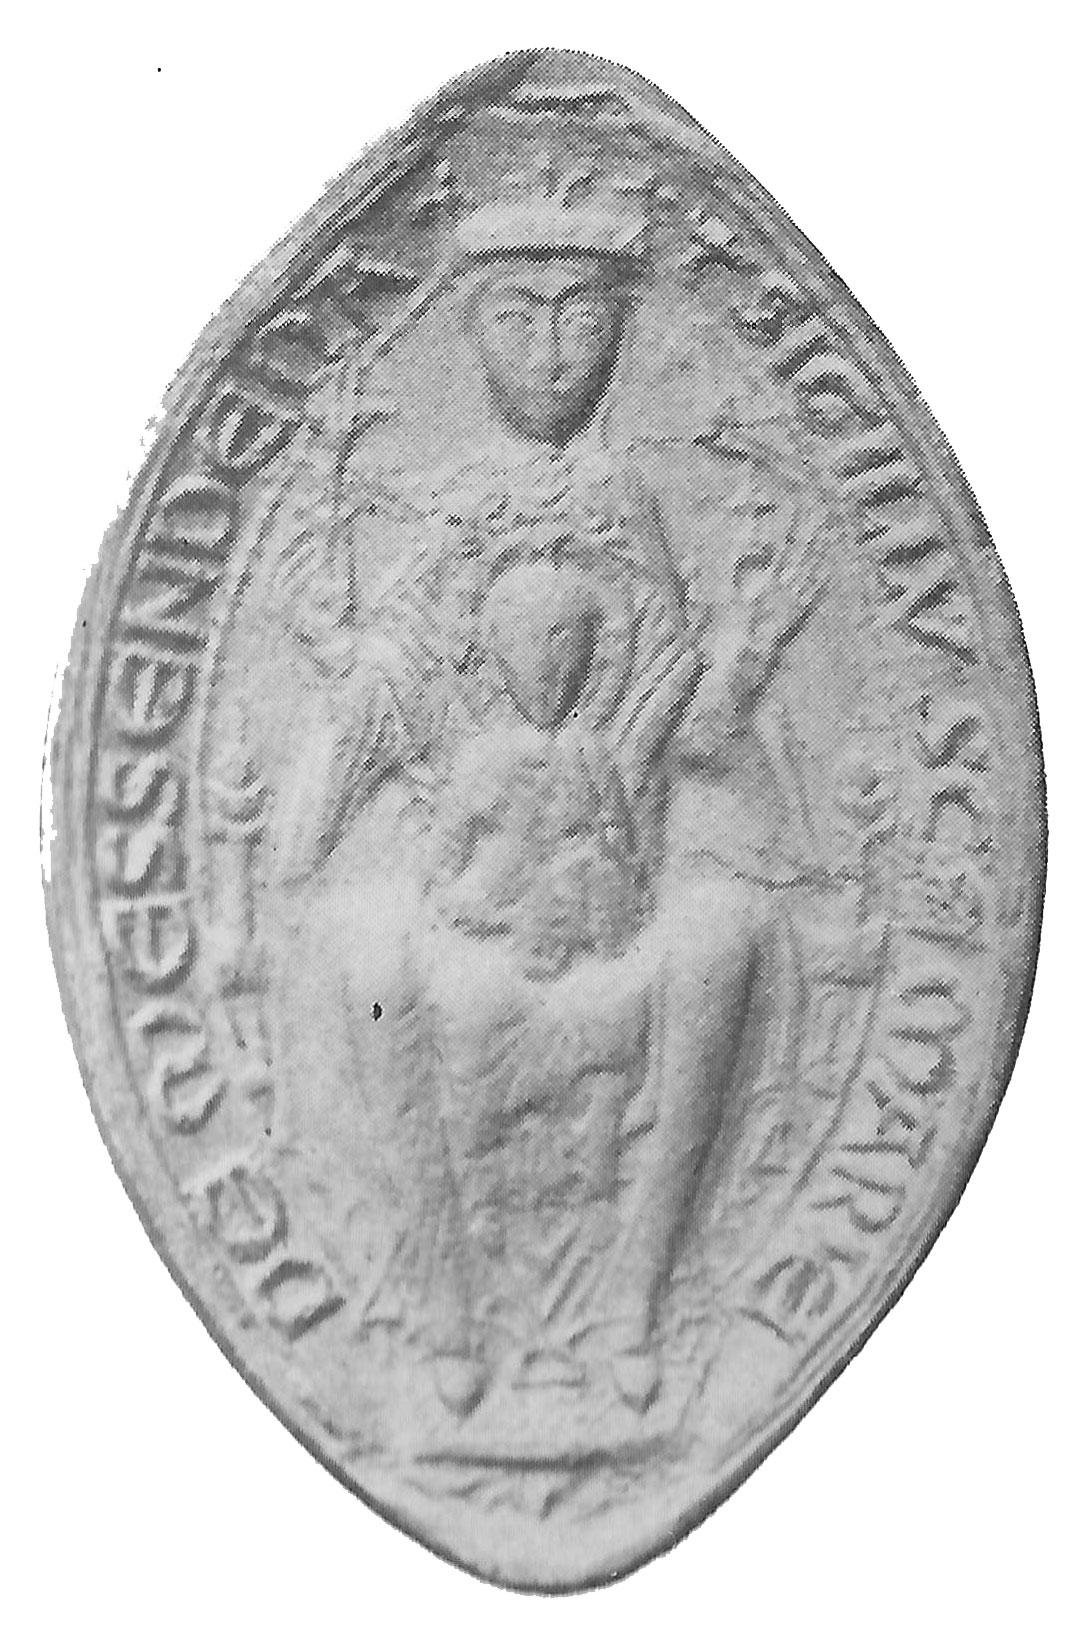 The wax seal of Missenden Abbey